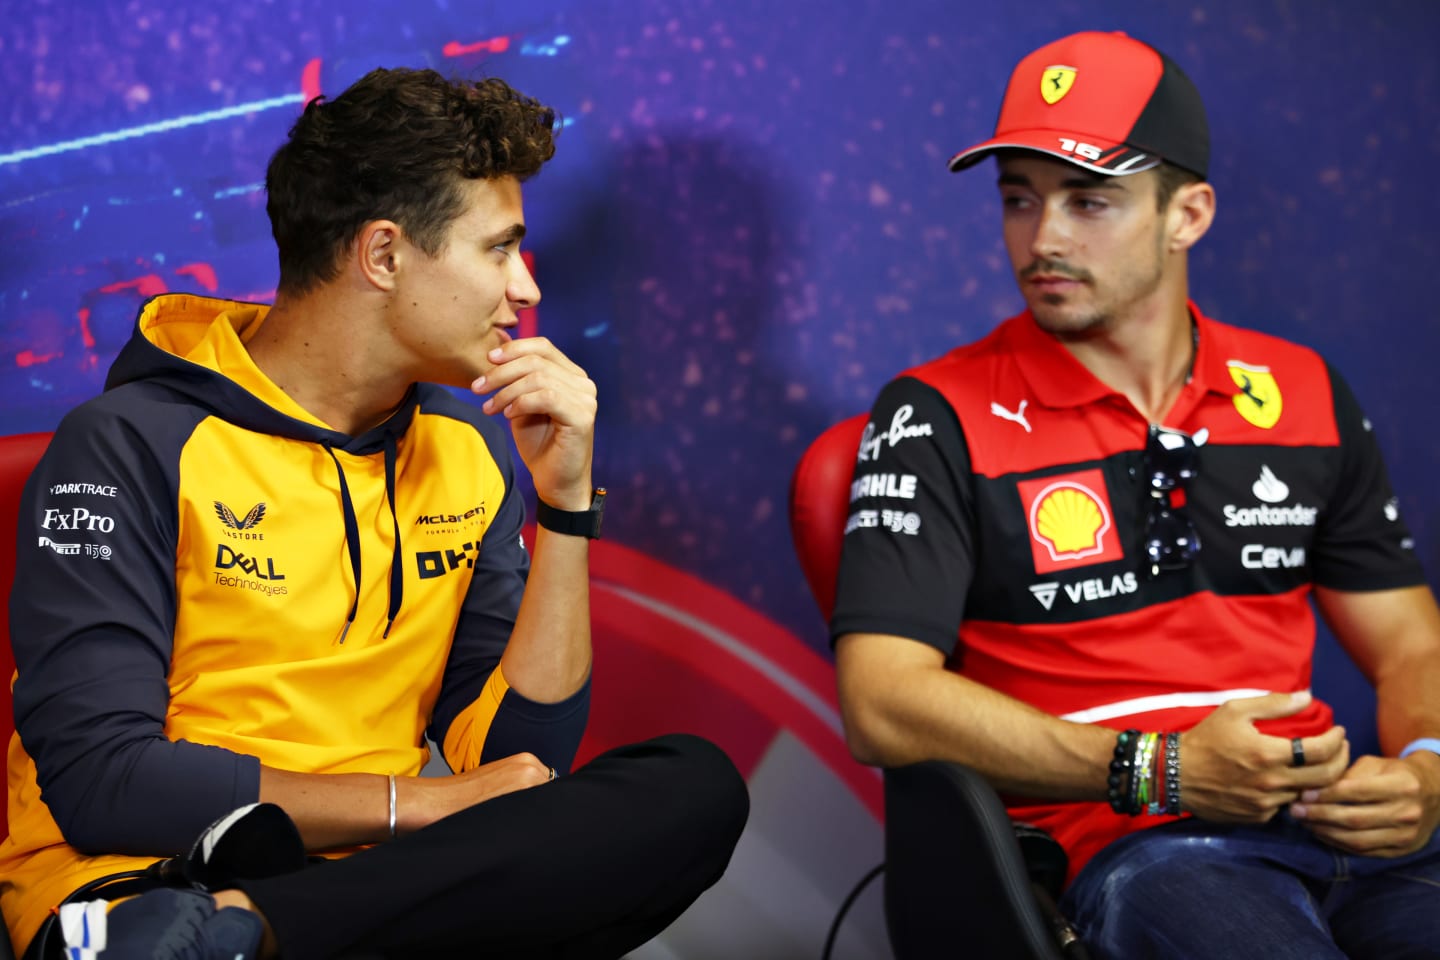 LE CASTELLET, FRANCE - JULY 21: Lando Norris of Great Britain and McLaren and Charles Leclerc of Monaco and Ferrari talk in the Drivers Press Conference during previews ahead of the F1 Grand Prix of France at Circuit Paul Ricard on July 21, 2022 in Le Castellet, France. (Photo by Bryn Lennon/Getty Images)